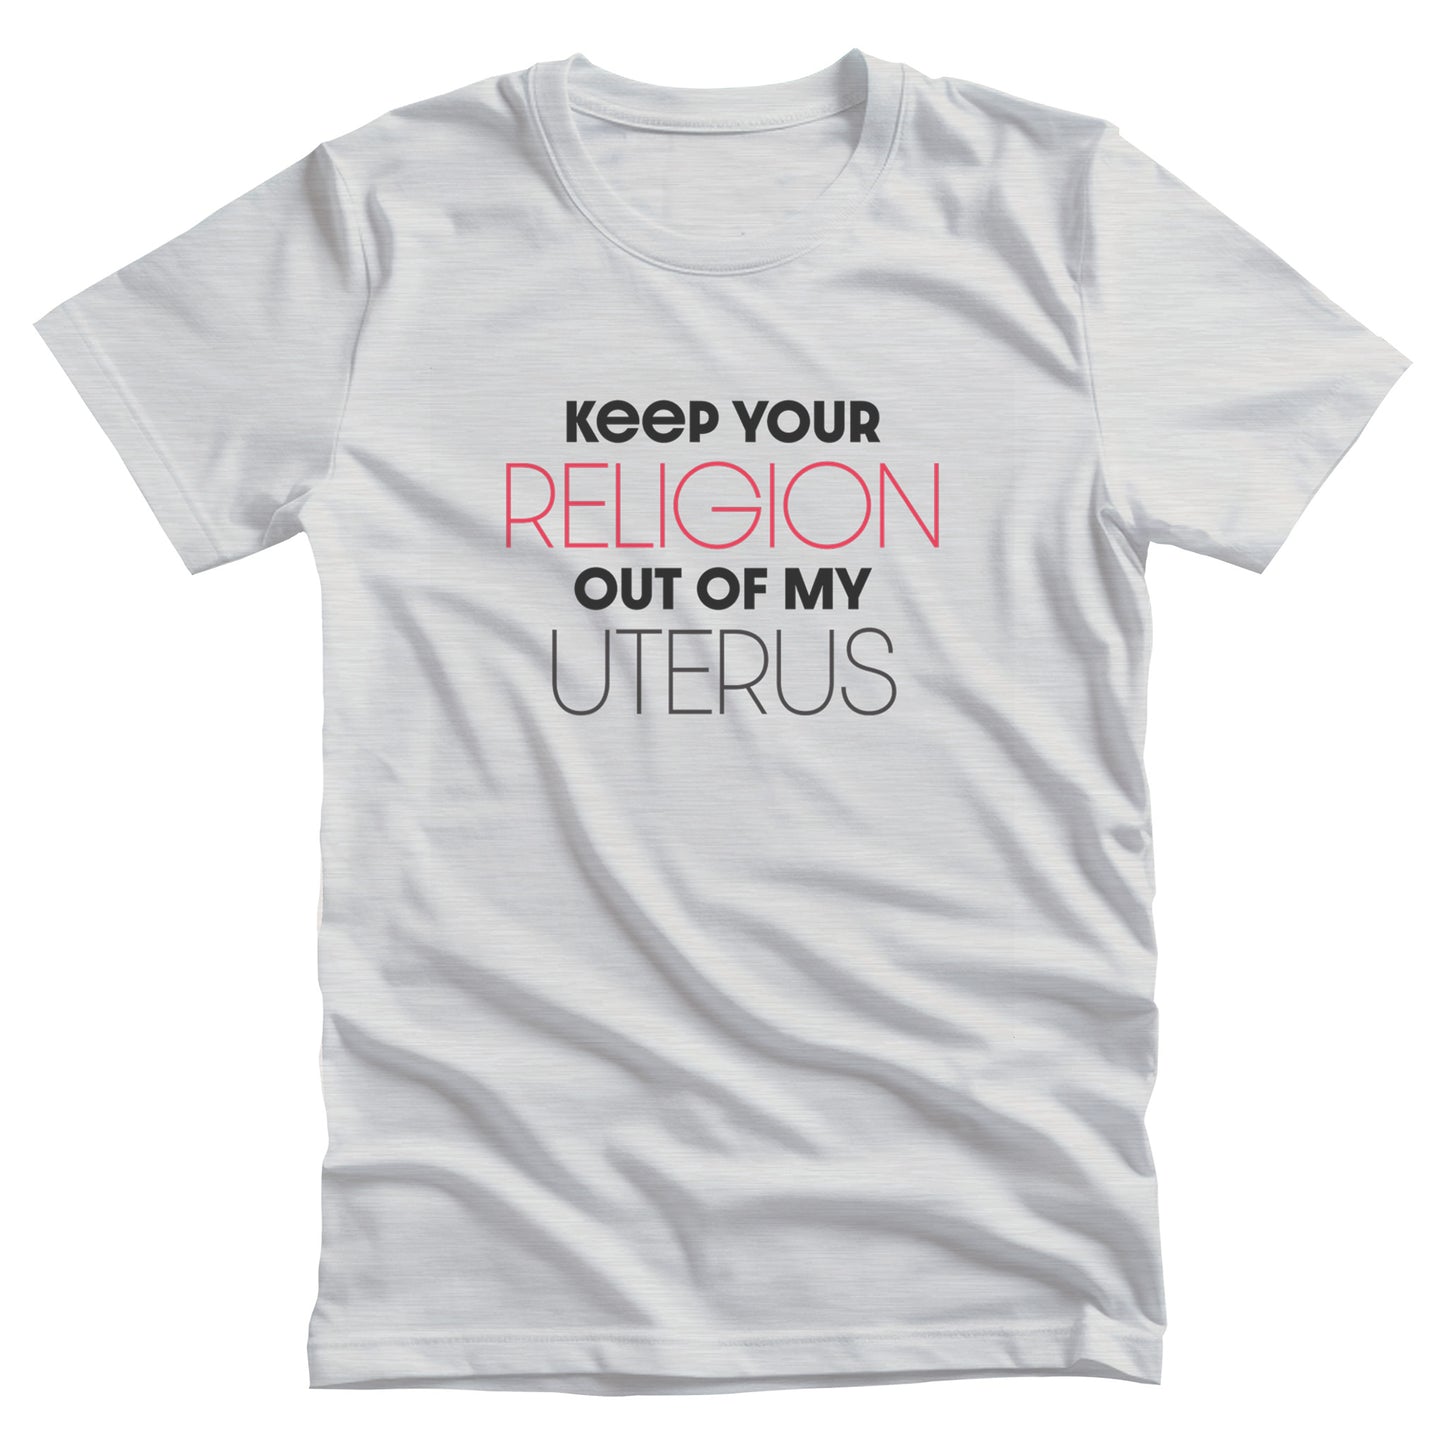 Ash color unisex t-shirt that says, “Keep Your Religion Out of My Uterus” in all caps. “Keep Your” is bold, “Religion” is on the next line, is a larger size, and is red, “out of my” is beneath that and in bold, and “uterus” is on the last line